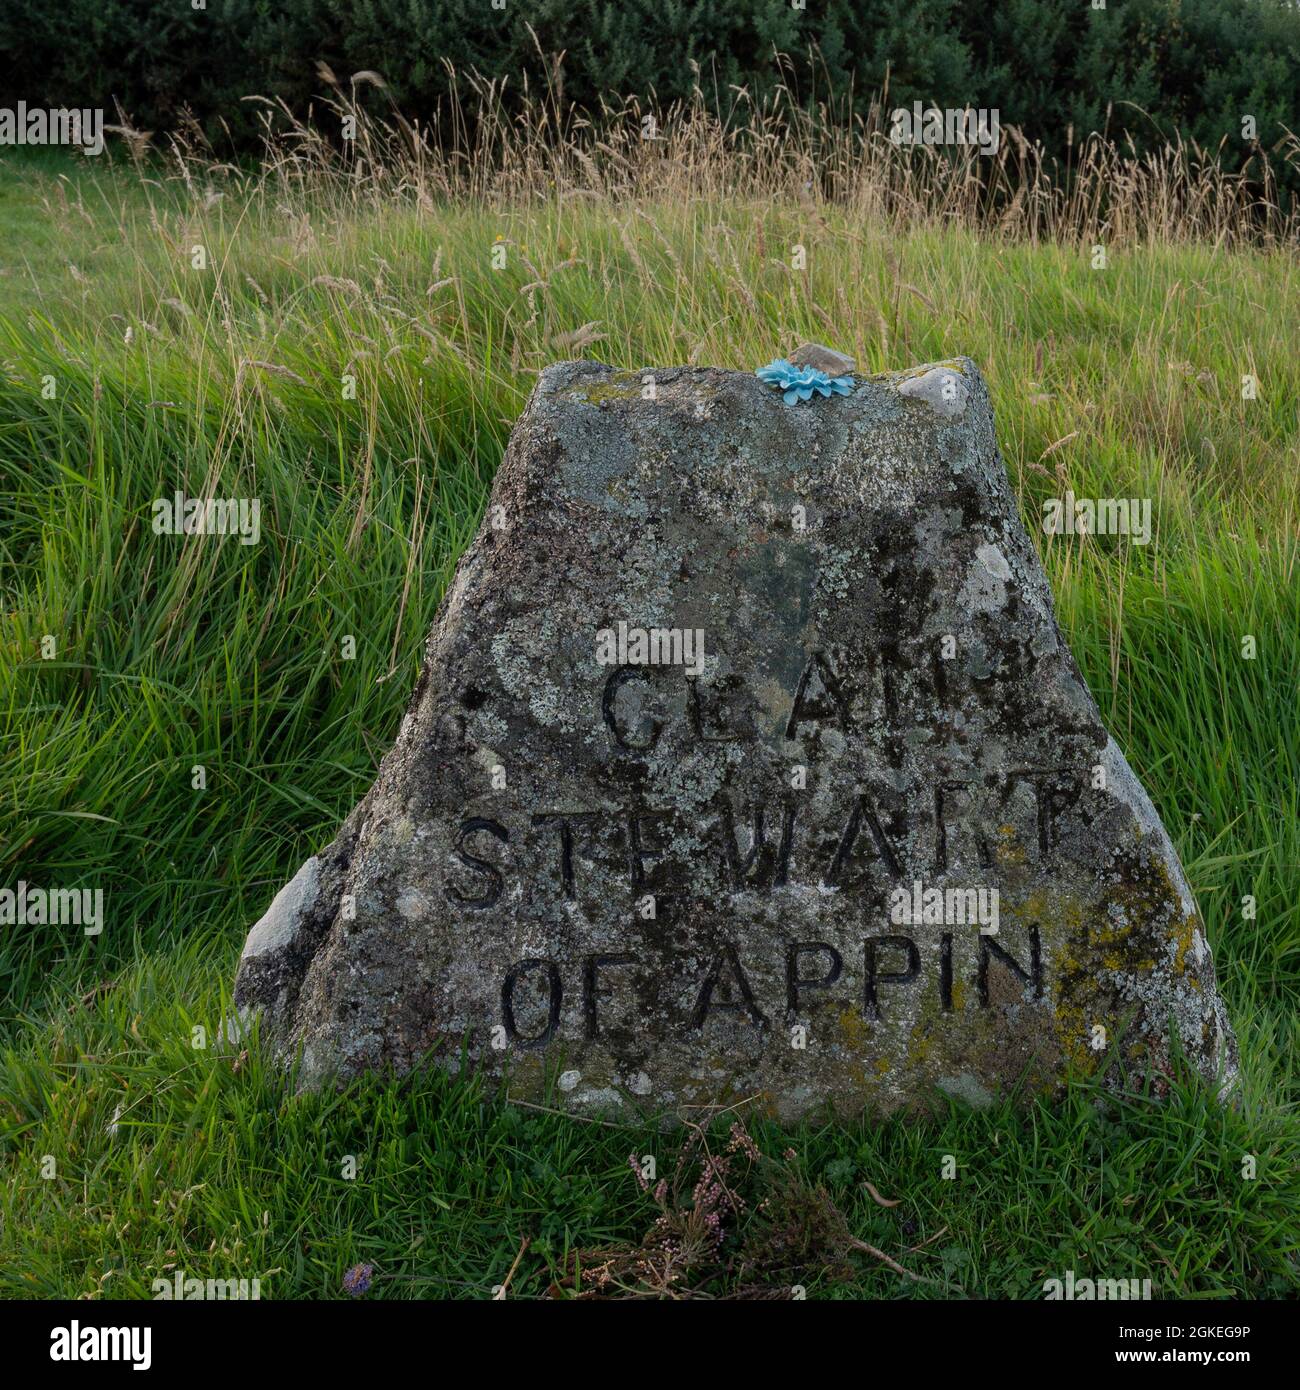 Culloden battlefield, headstone for Clan Stewart of Appin. Blue flower placed on top of headstone. Surrounding long grass. Stock Photo